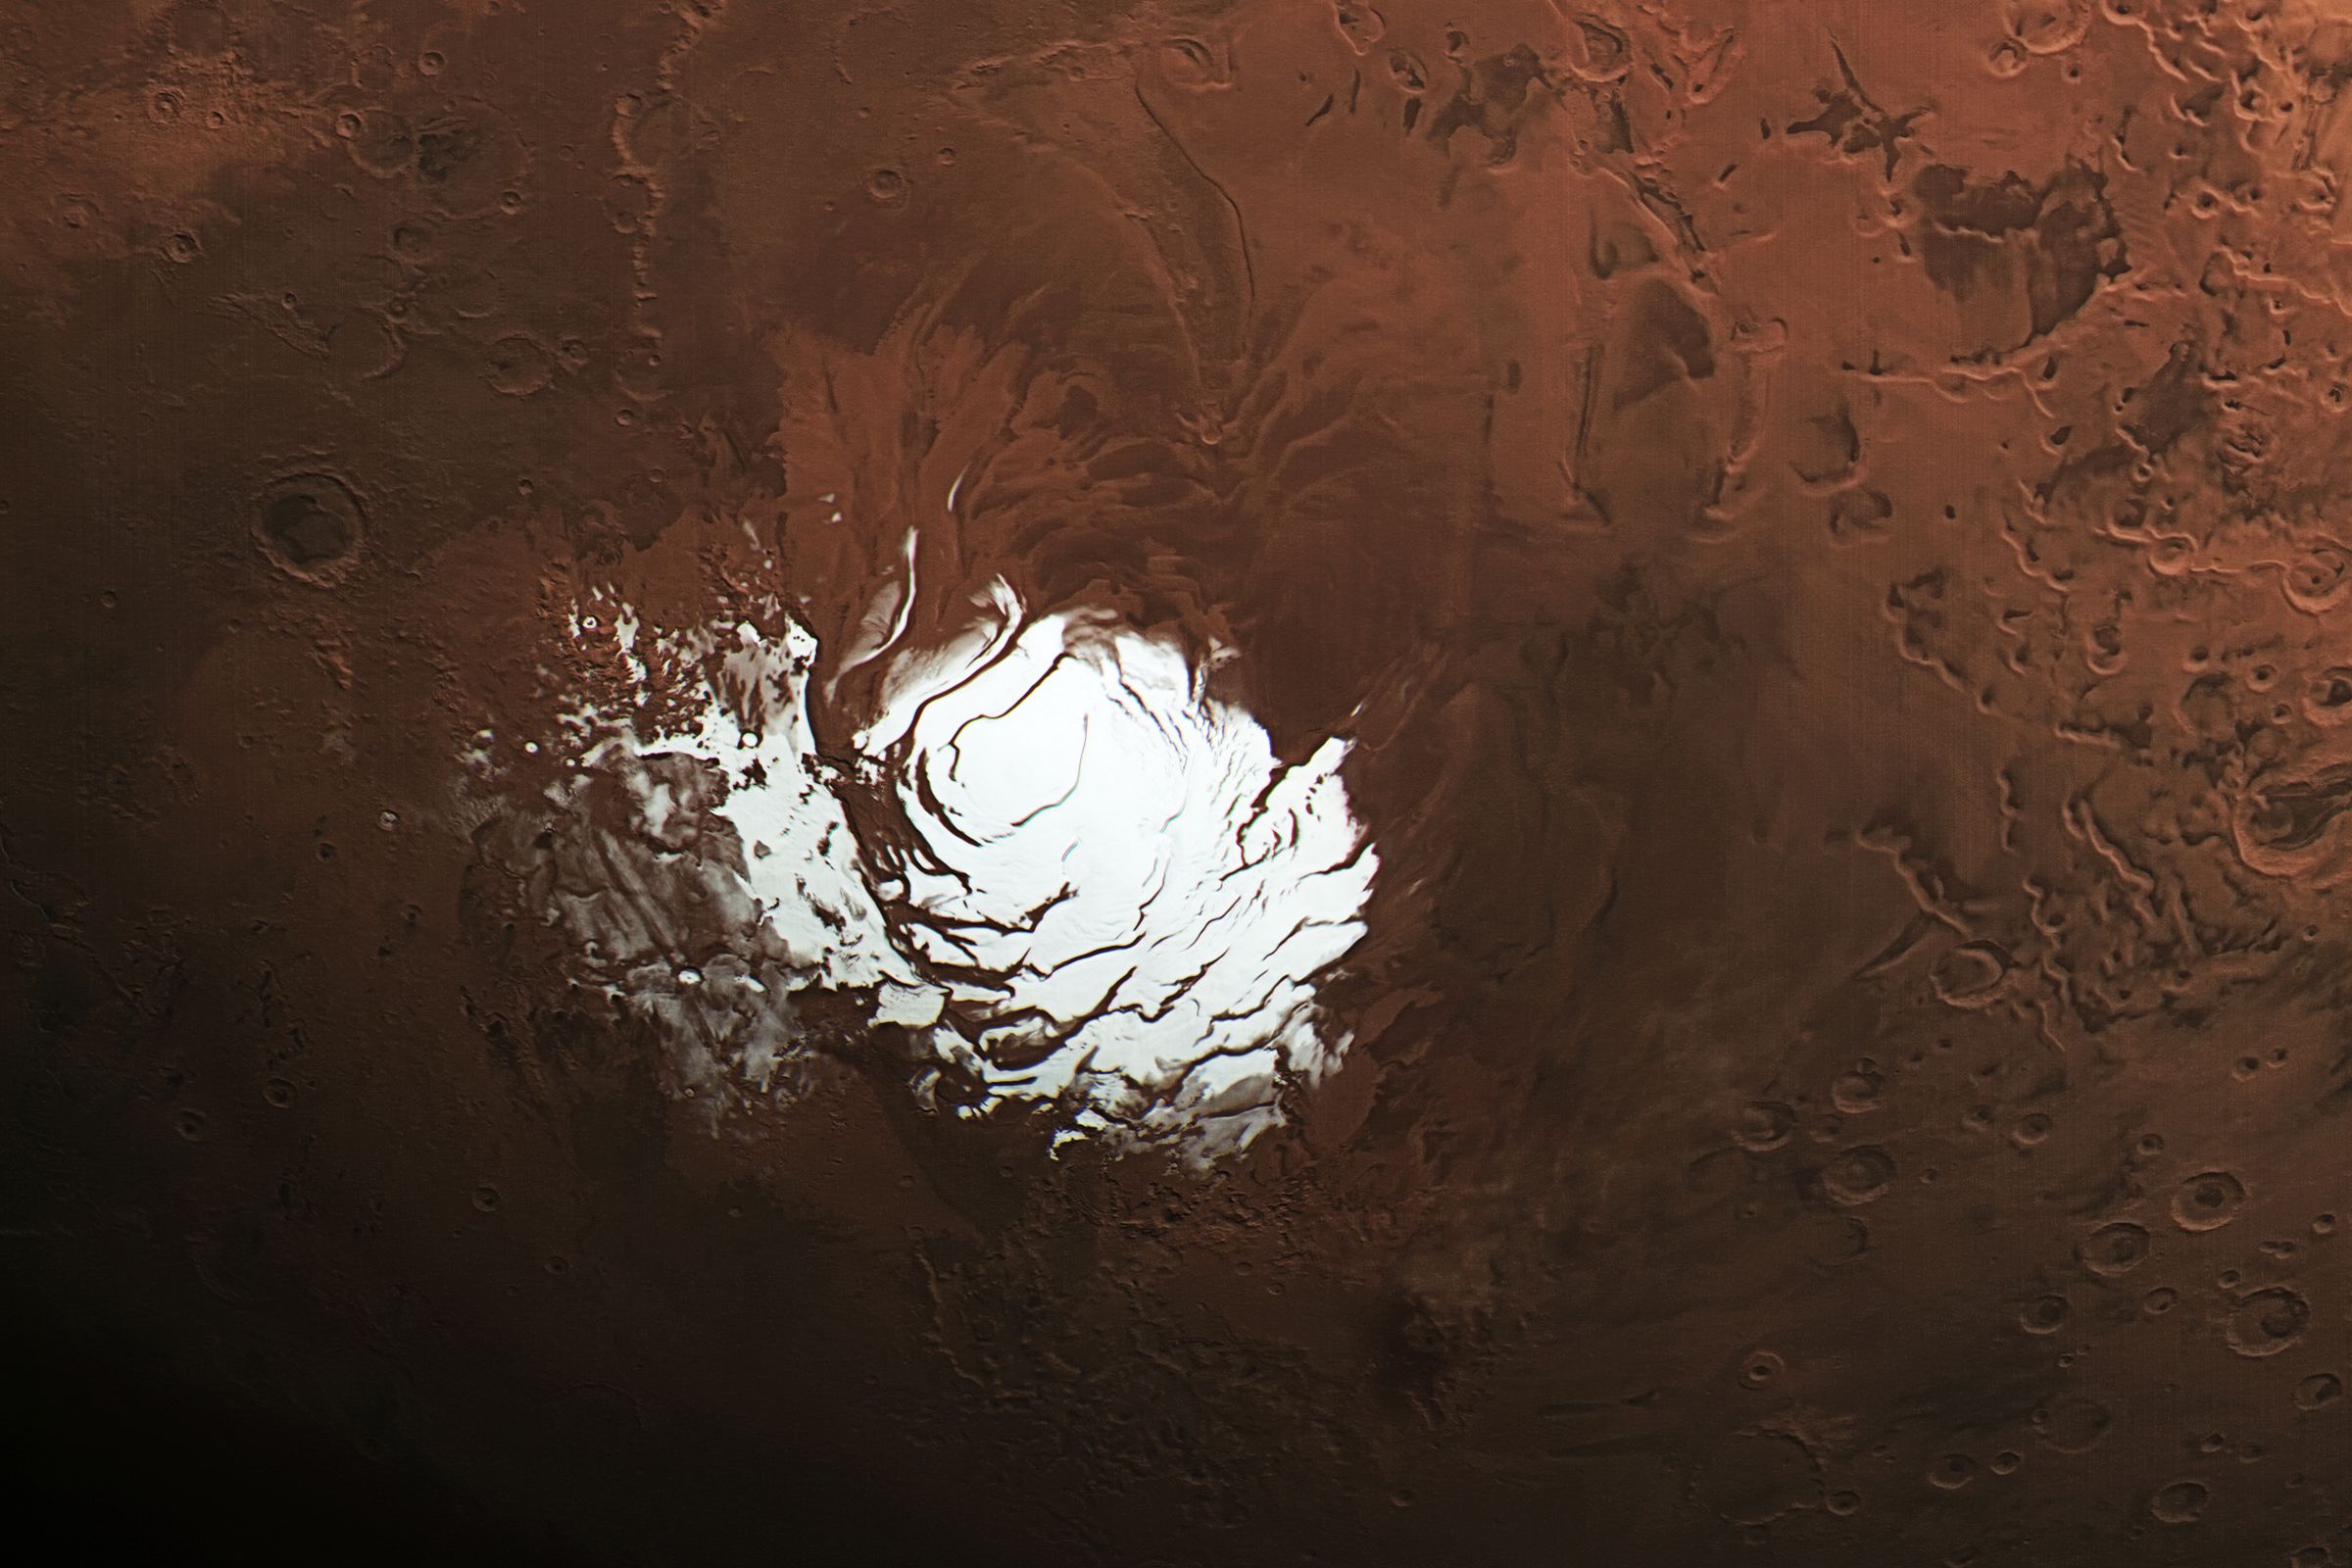 Mars’ south pole, as seen from Mars Express